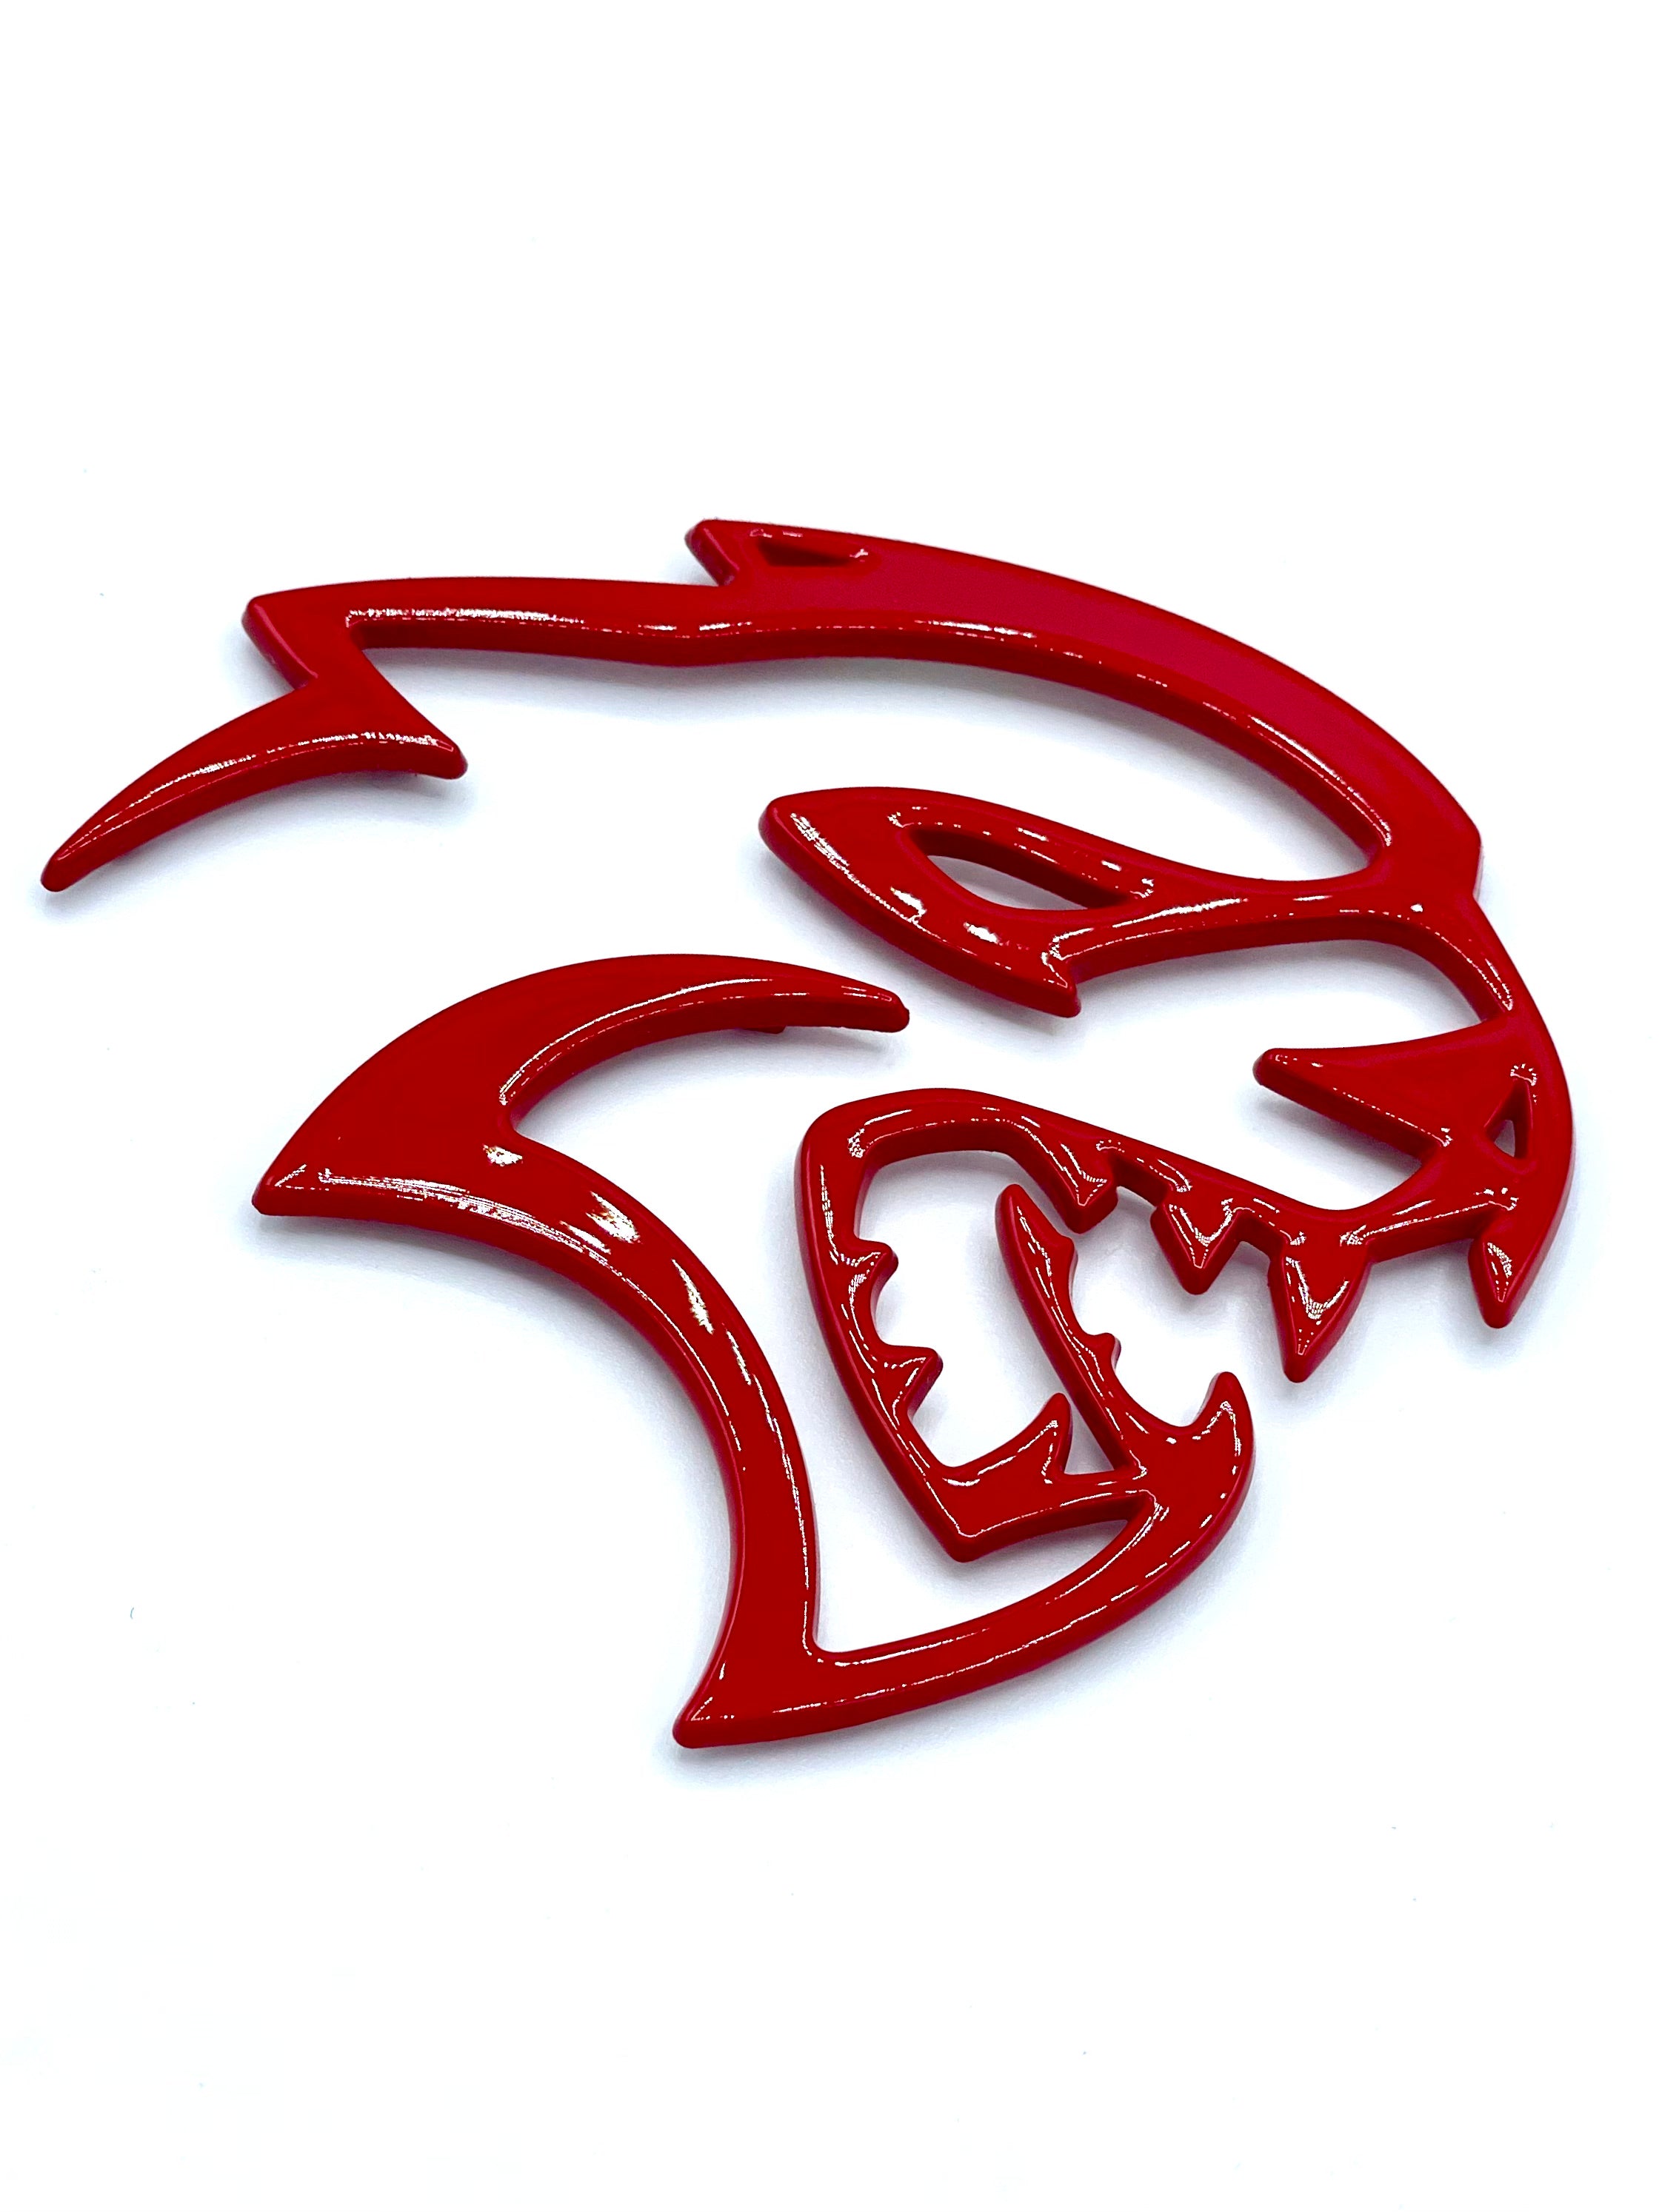 CCH Painted “Hellcat” Emblems